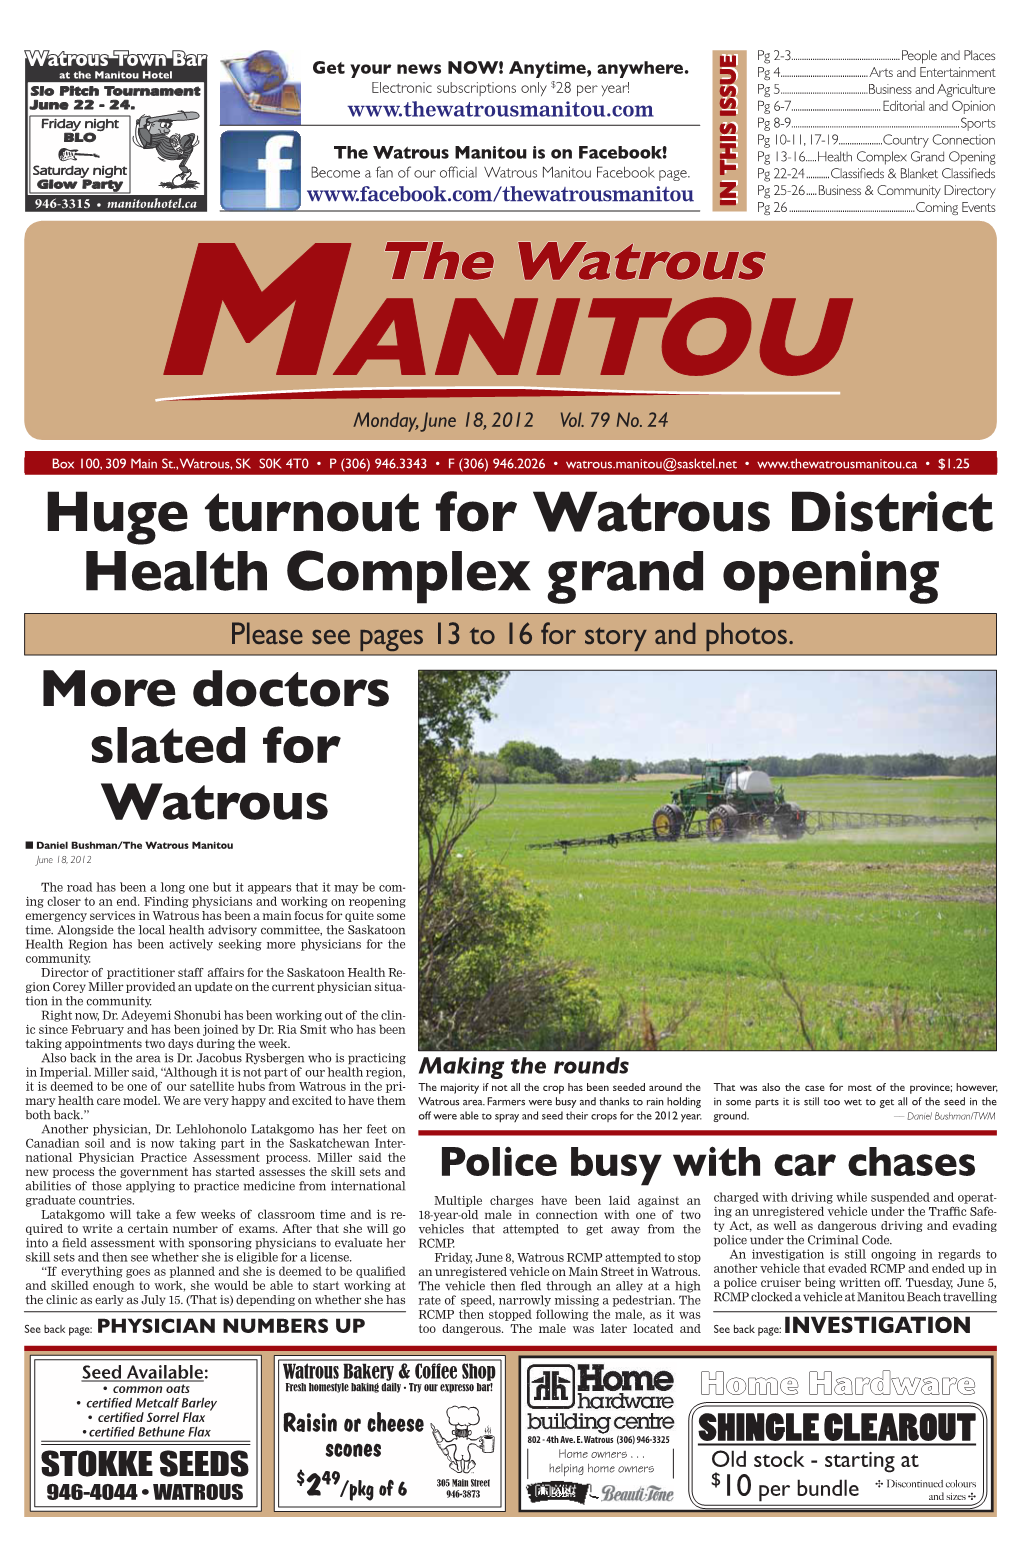 Manitou Hotel Get Your News NOW! Anytime, Anywhere